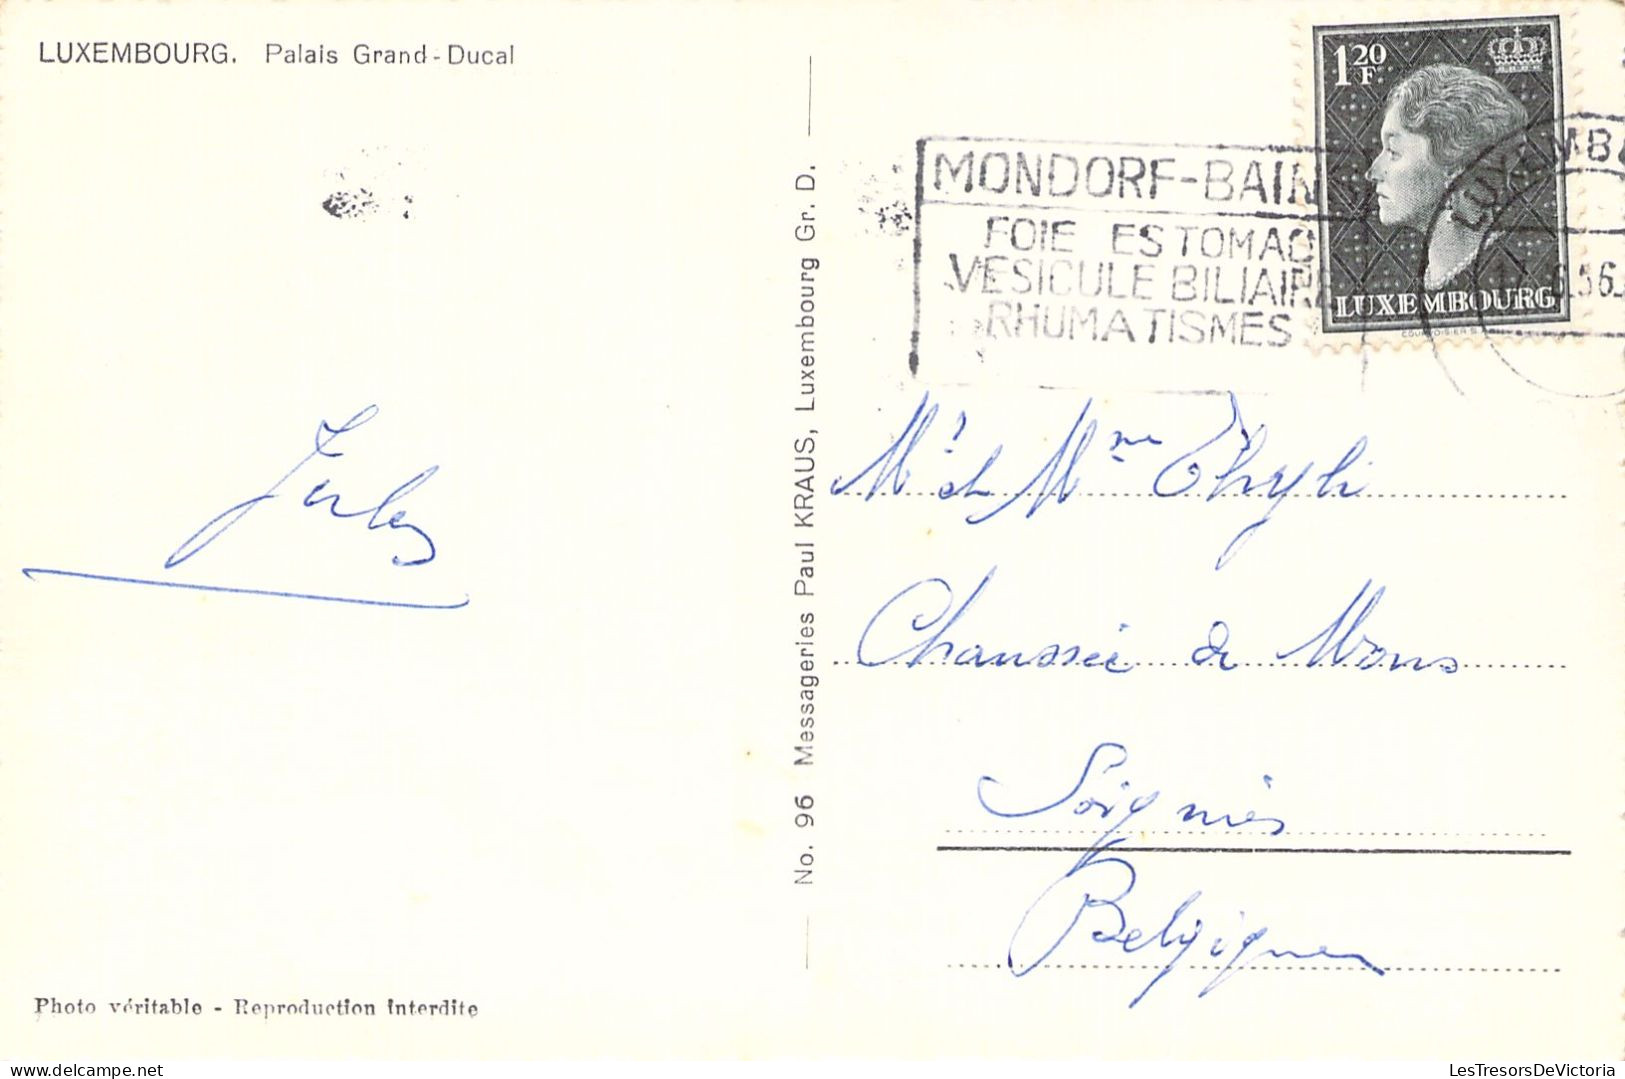 LUXEMBOURG - Palais Grand Ducal - Carte Postale Ancienne - Luxembourg - Ville